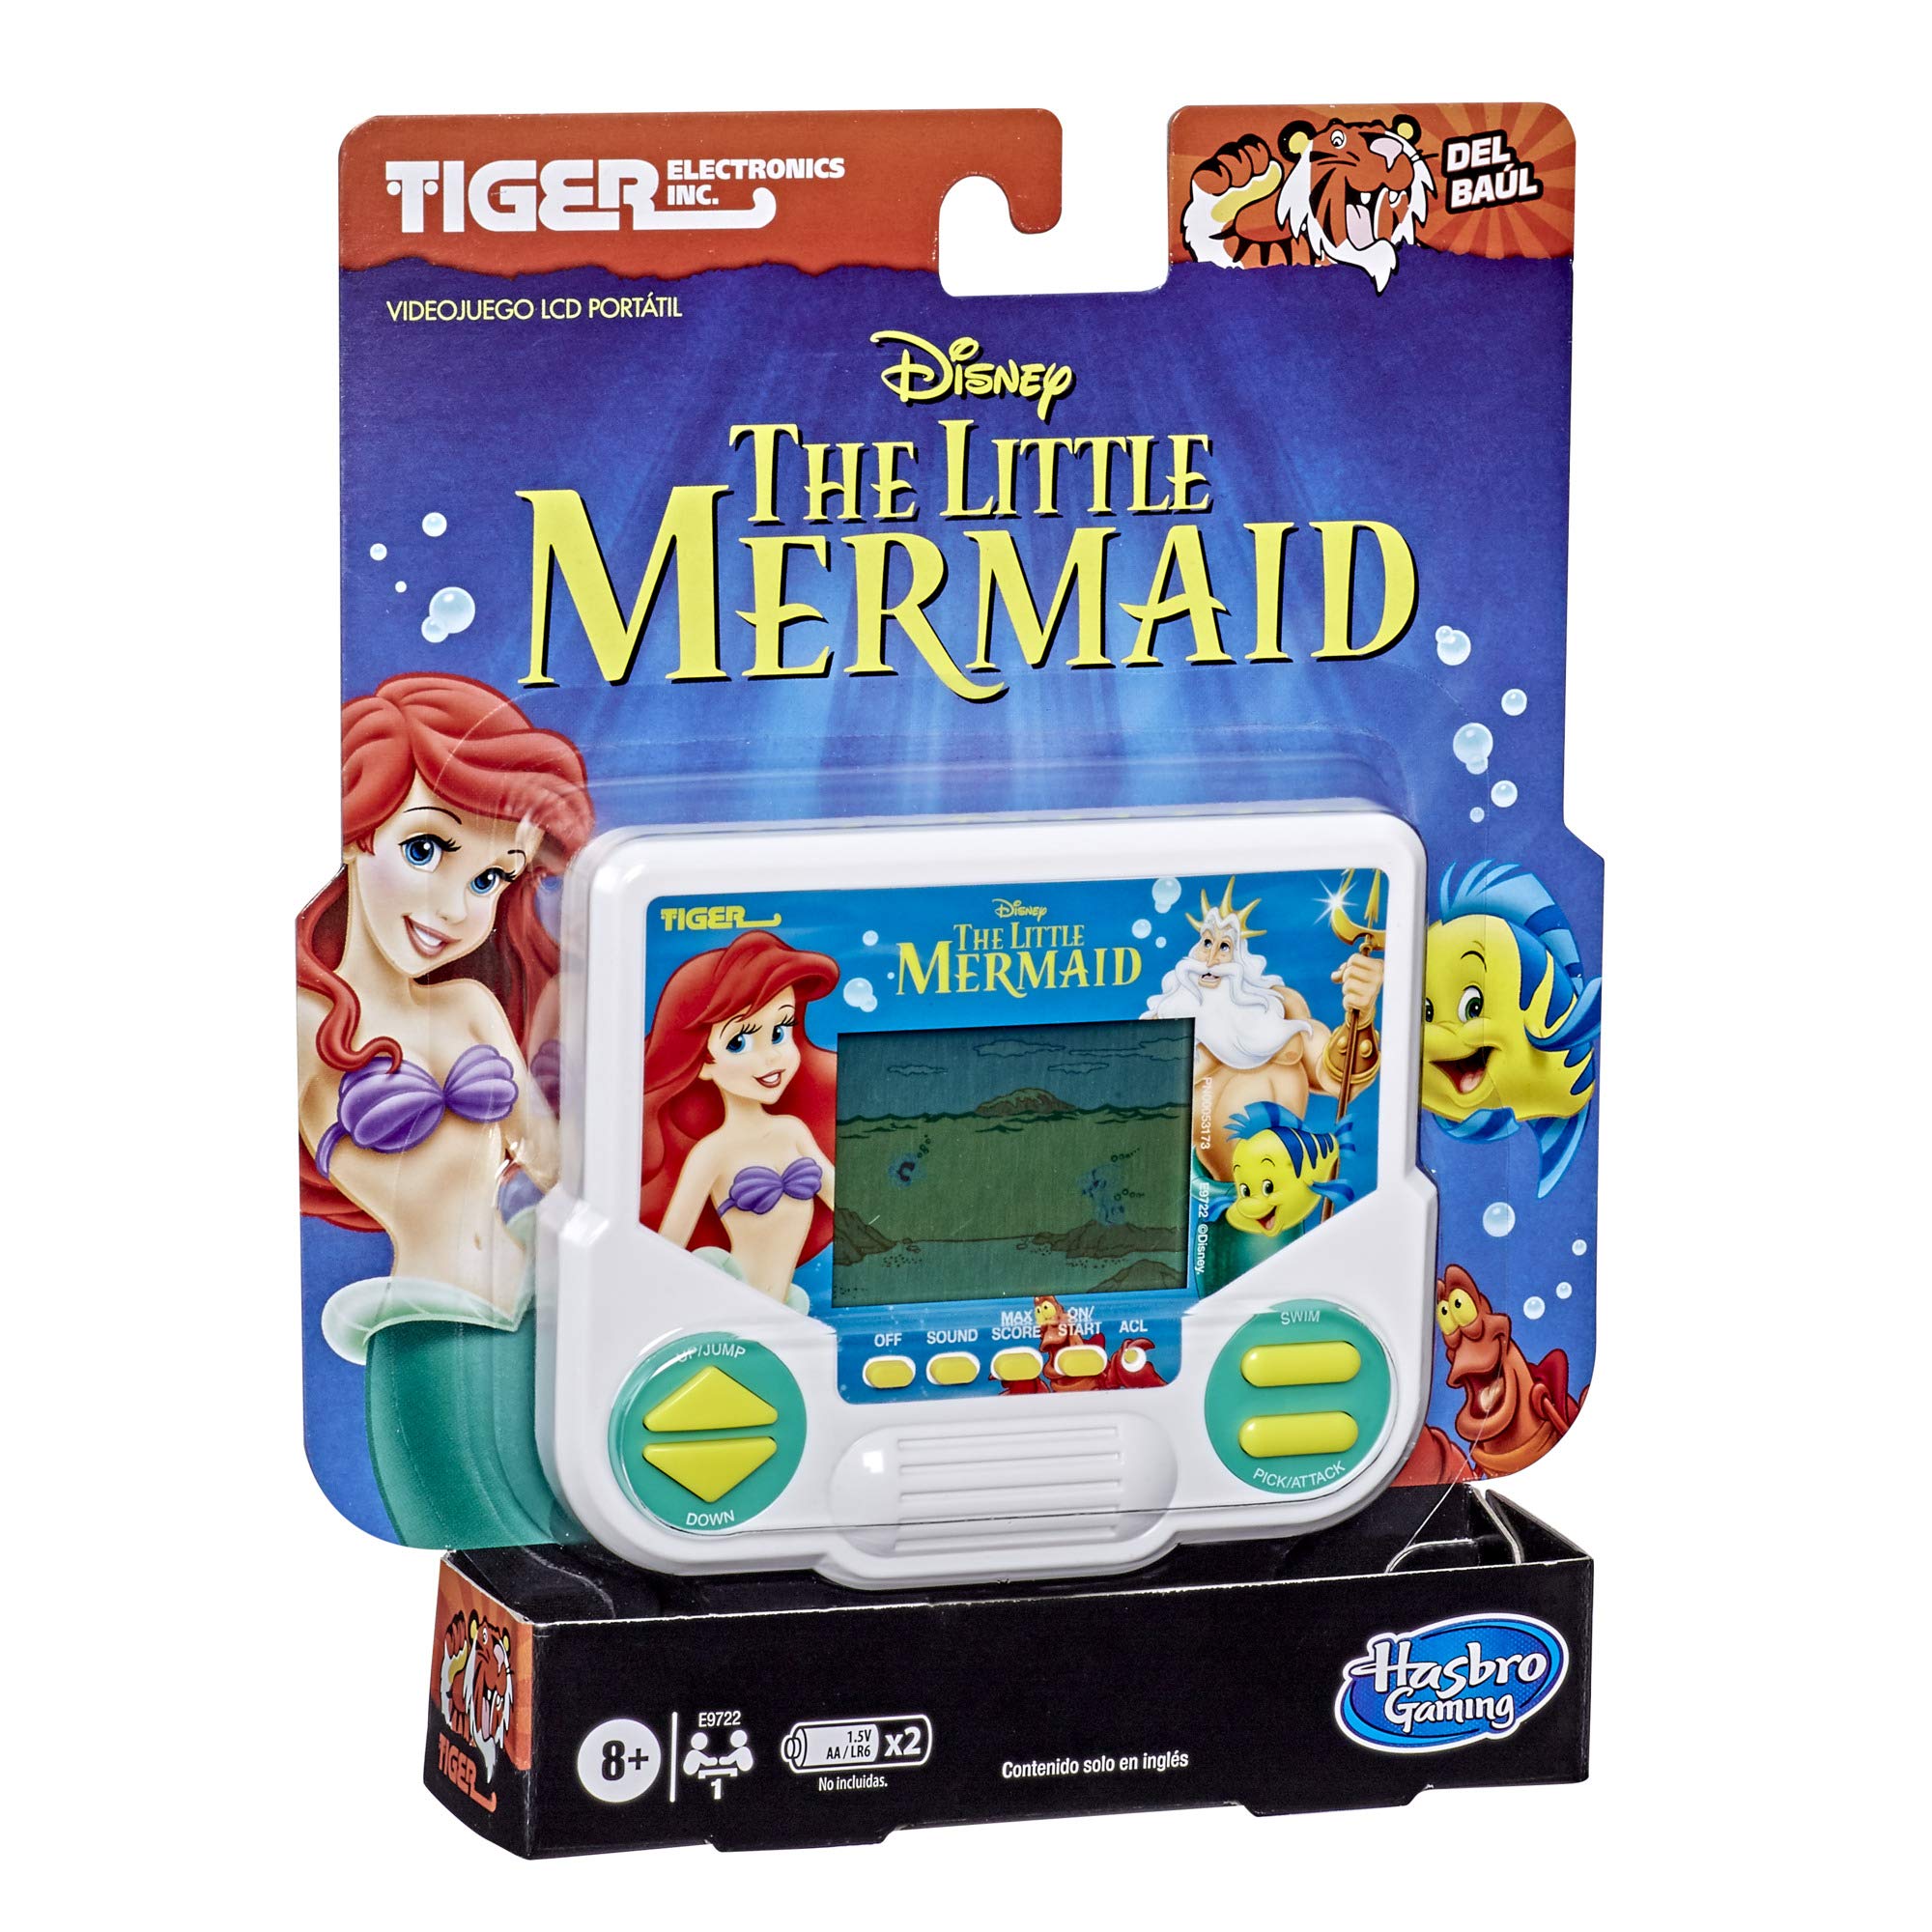 Hasbro Gaming Tiger Electronics Disney's The Little Mermaid Electronic LCD Video Game, Retro-Inspired Edition, Handheld 1-Player Game, Ages 8 and Up , Blue